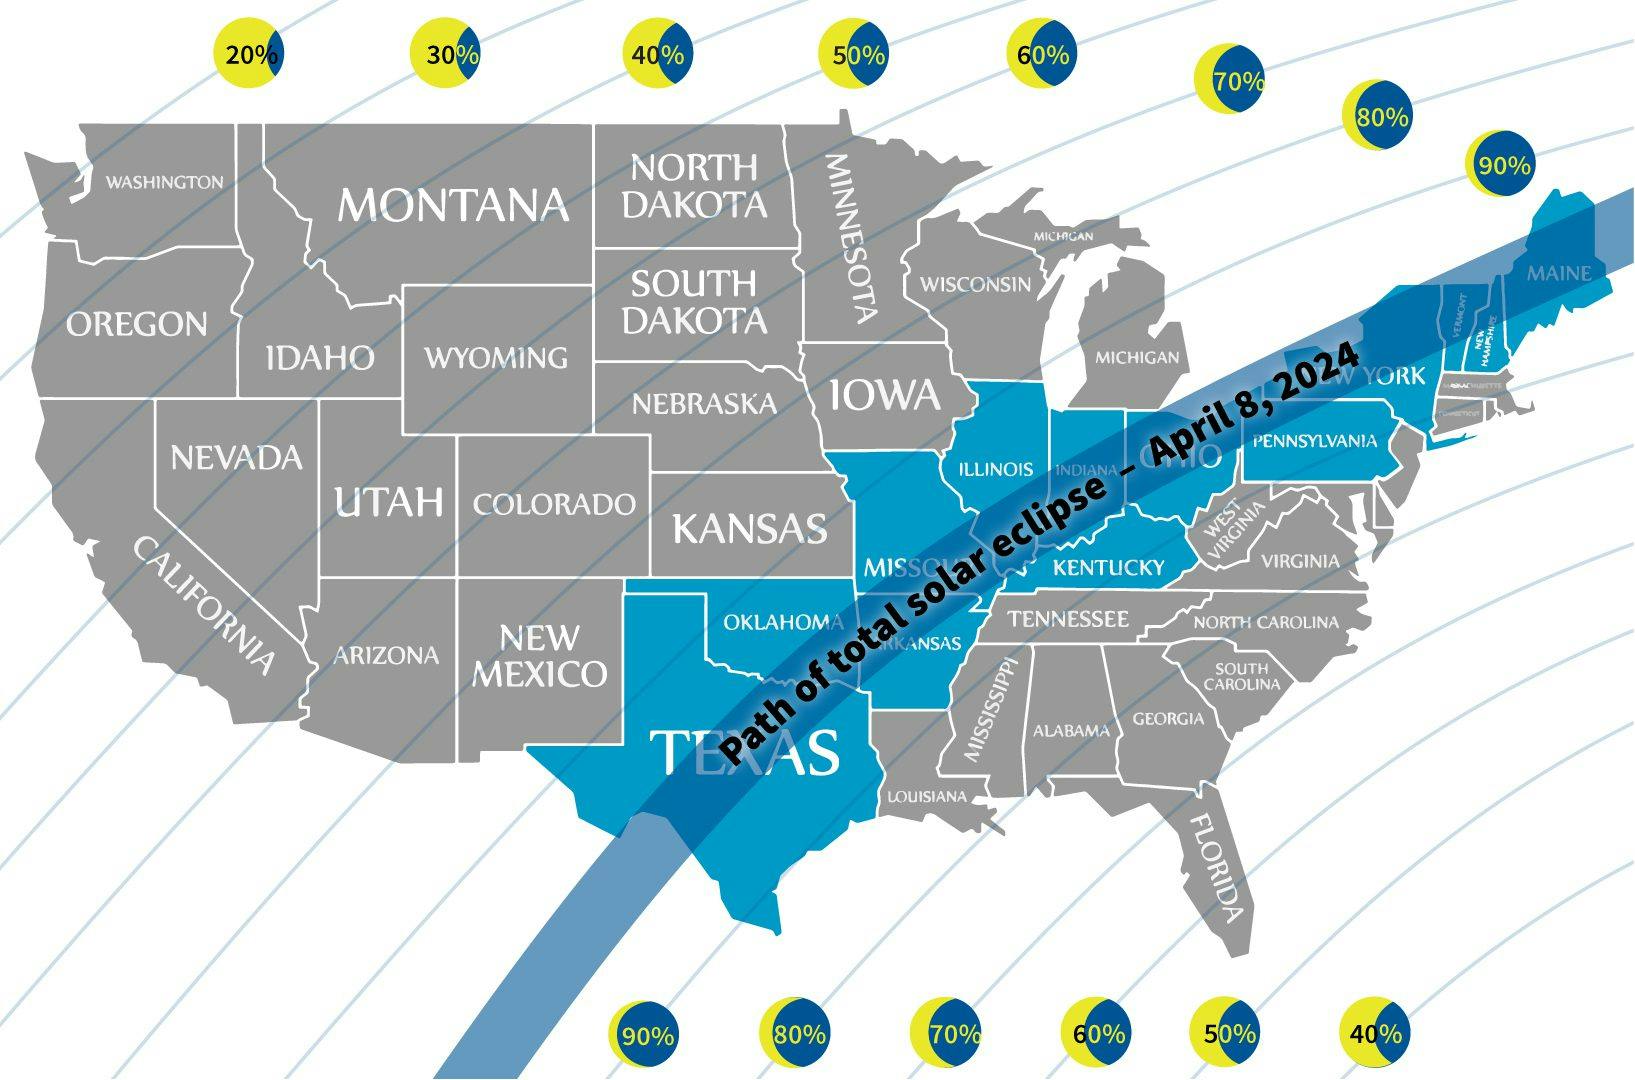 Path of the solar eclipse across the United States (Photo Credit: Prevent Blindness)